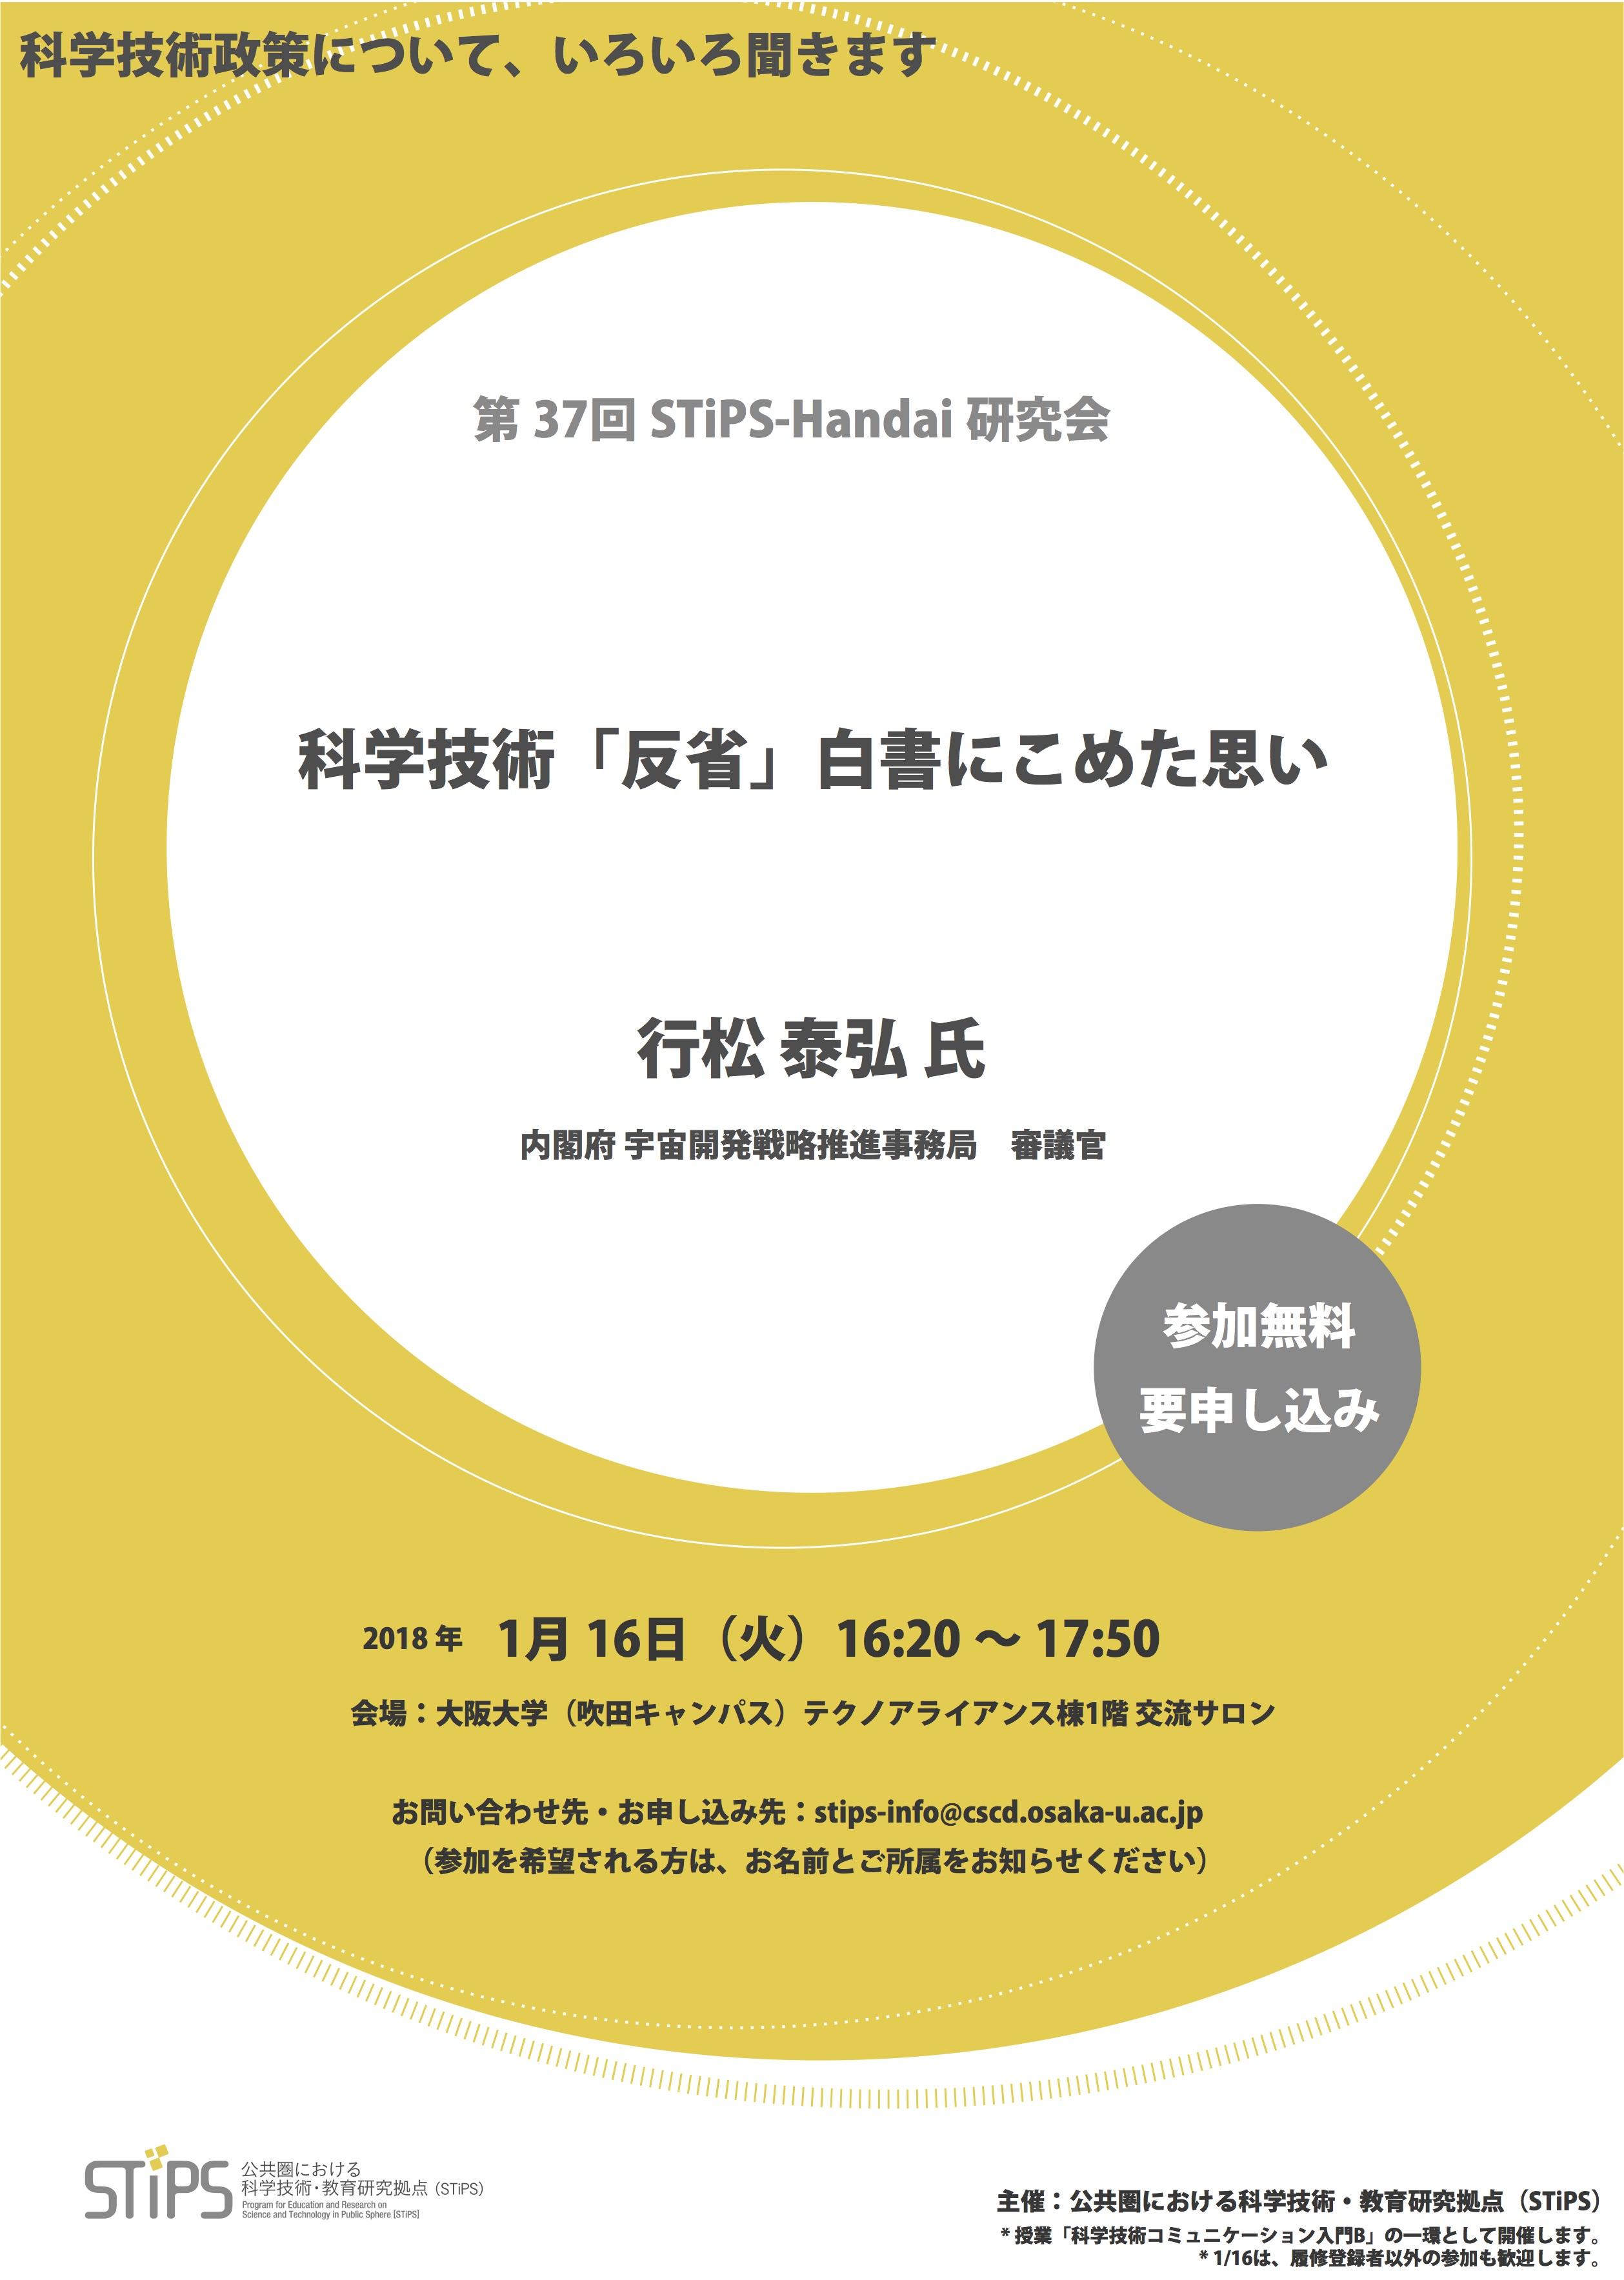 http://scirex.grips.ac.jp/events/Flyer_for180116.jpg